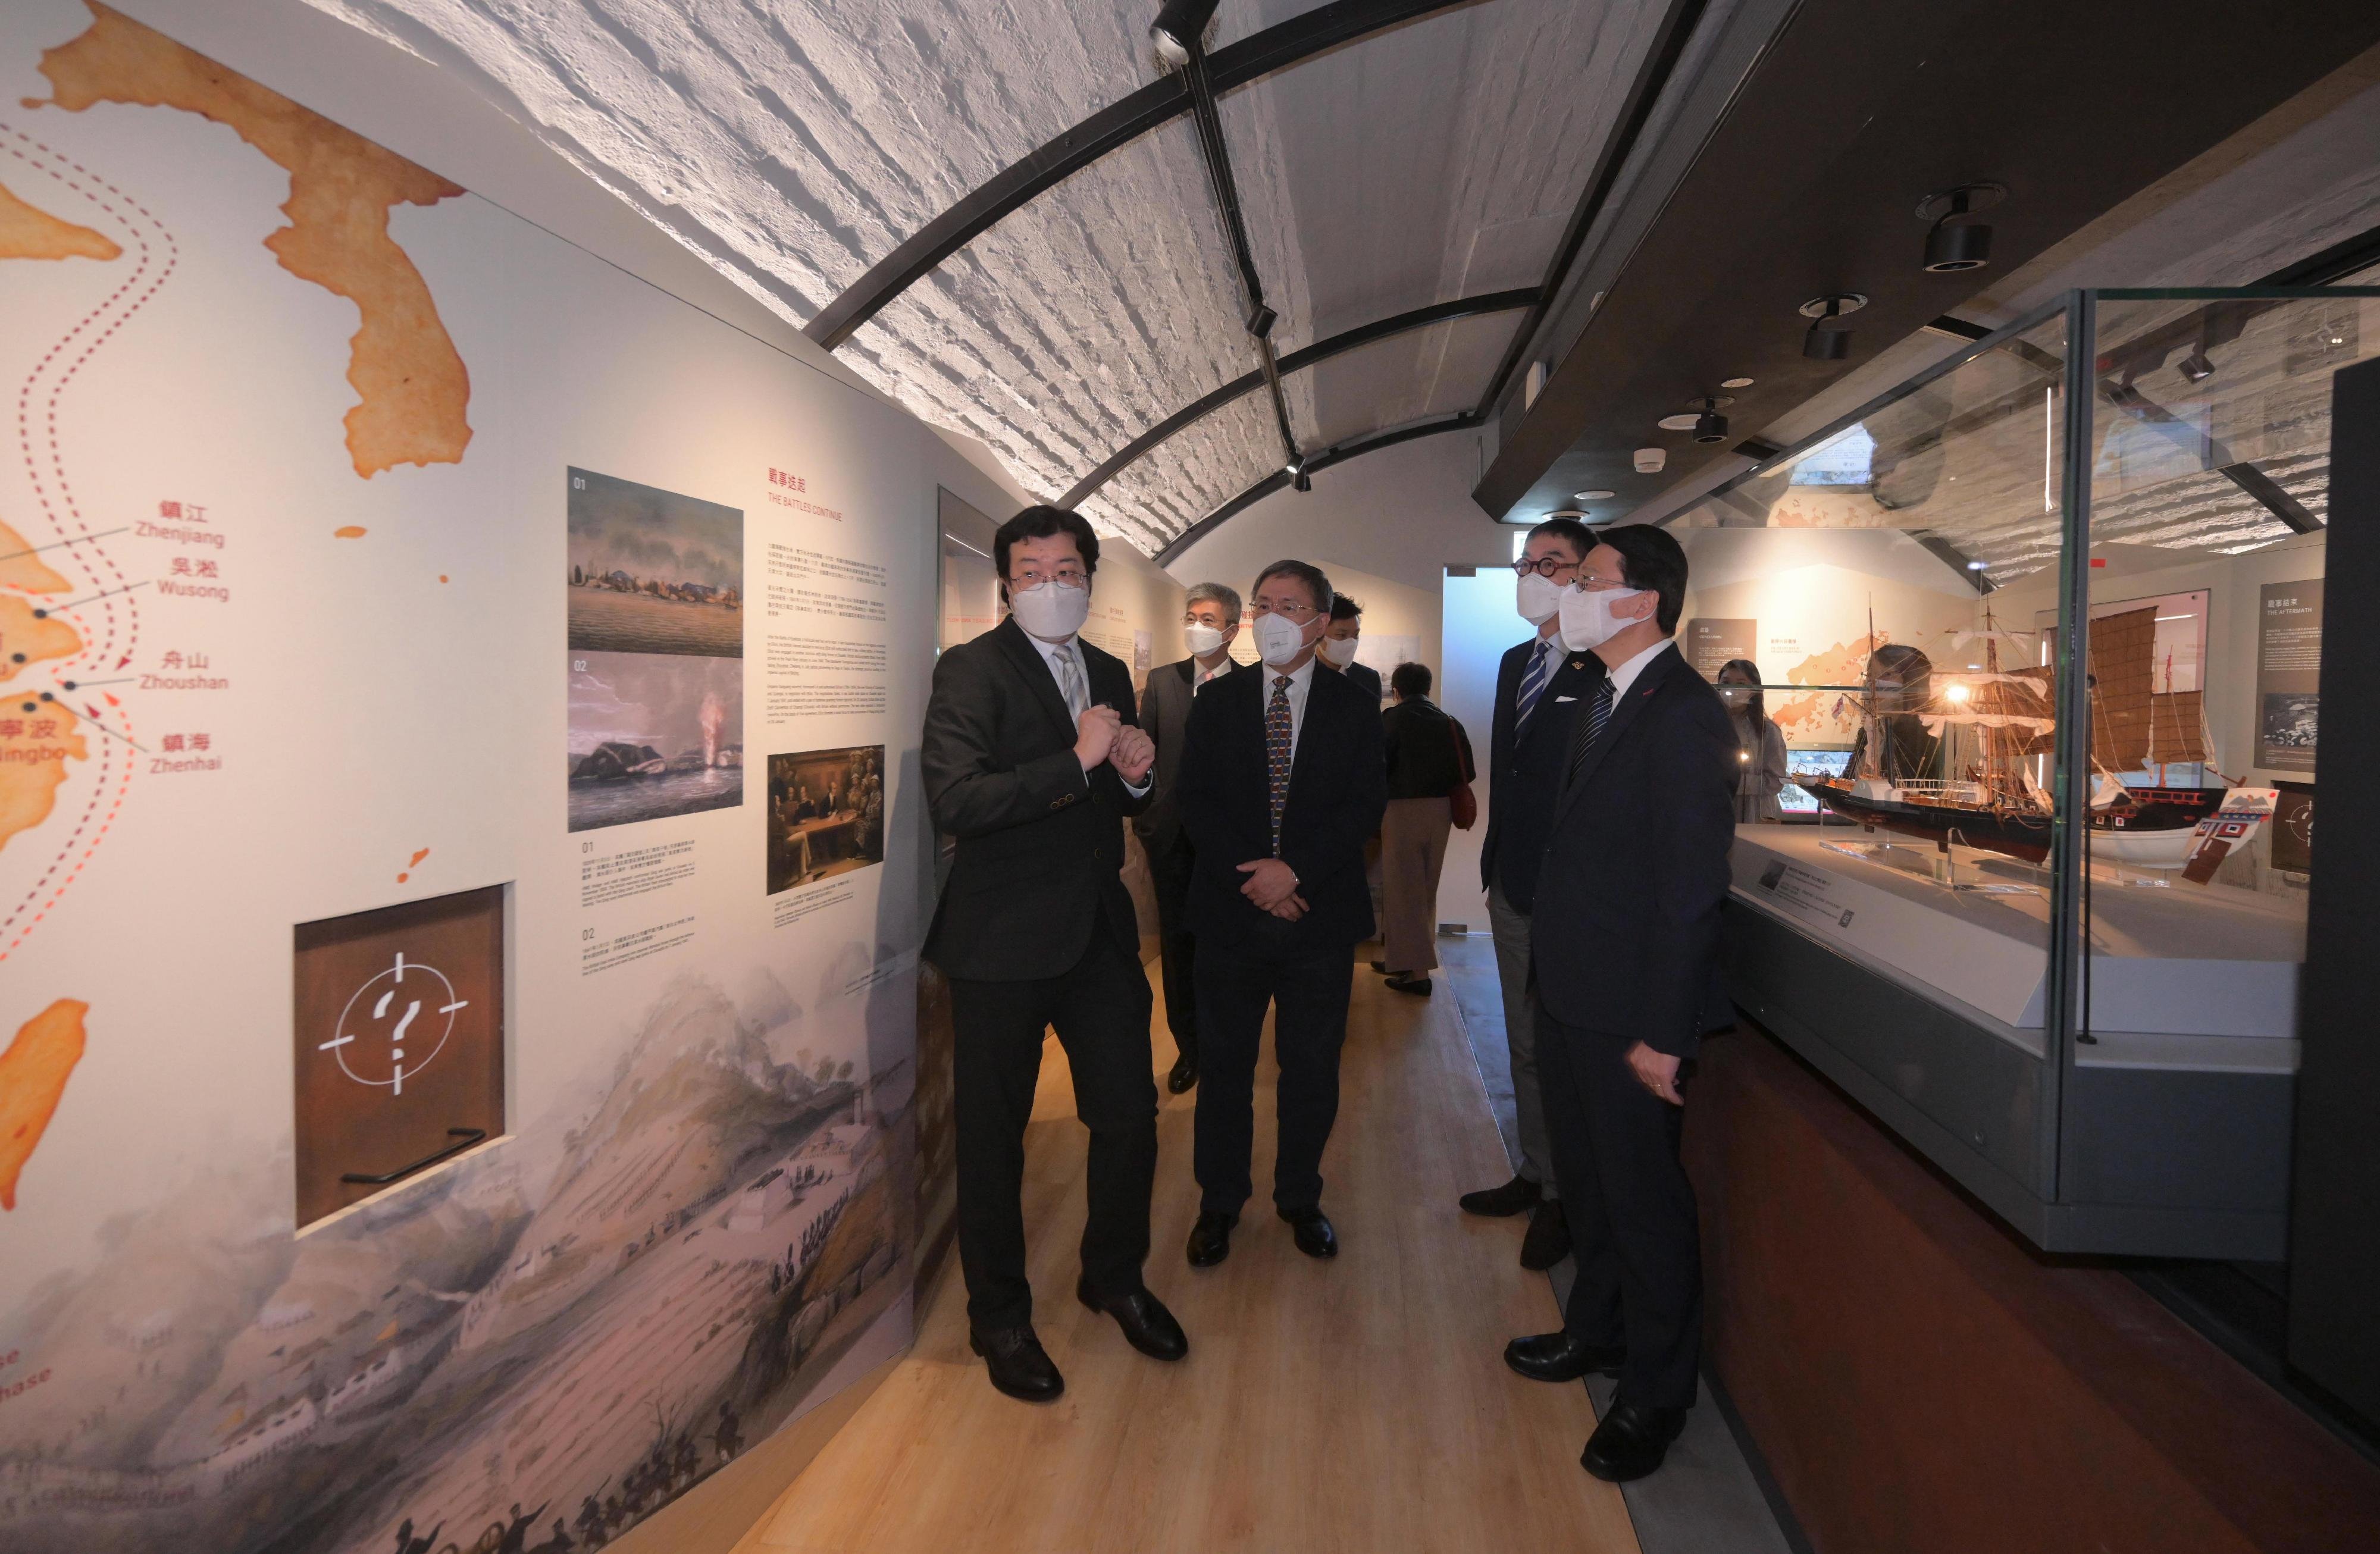 The Hong Kong Museum of Coastal Defence will reopen to the public from tomorrow (November 24) and bring forward a new permanent exhibition "The Story of Hong Kong Coastal Defence". The opening ceremony for the exhibition was held today (November 23). Photo shows the Museum Director of the Hong Kong Museum of History, Mr Ng Chi-wo (first left) introducing the exhibition to the Deputy Chief Secretary for Administration, Mr Cheuk Wing-hing (second left); the Chairman of the Museum Advisory Committee, Mr Douglas So (second right); and the Director of Leisure and Cultural Services, Mr Vincent Liu (first right).